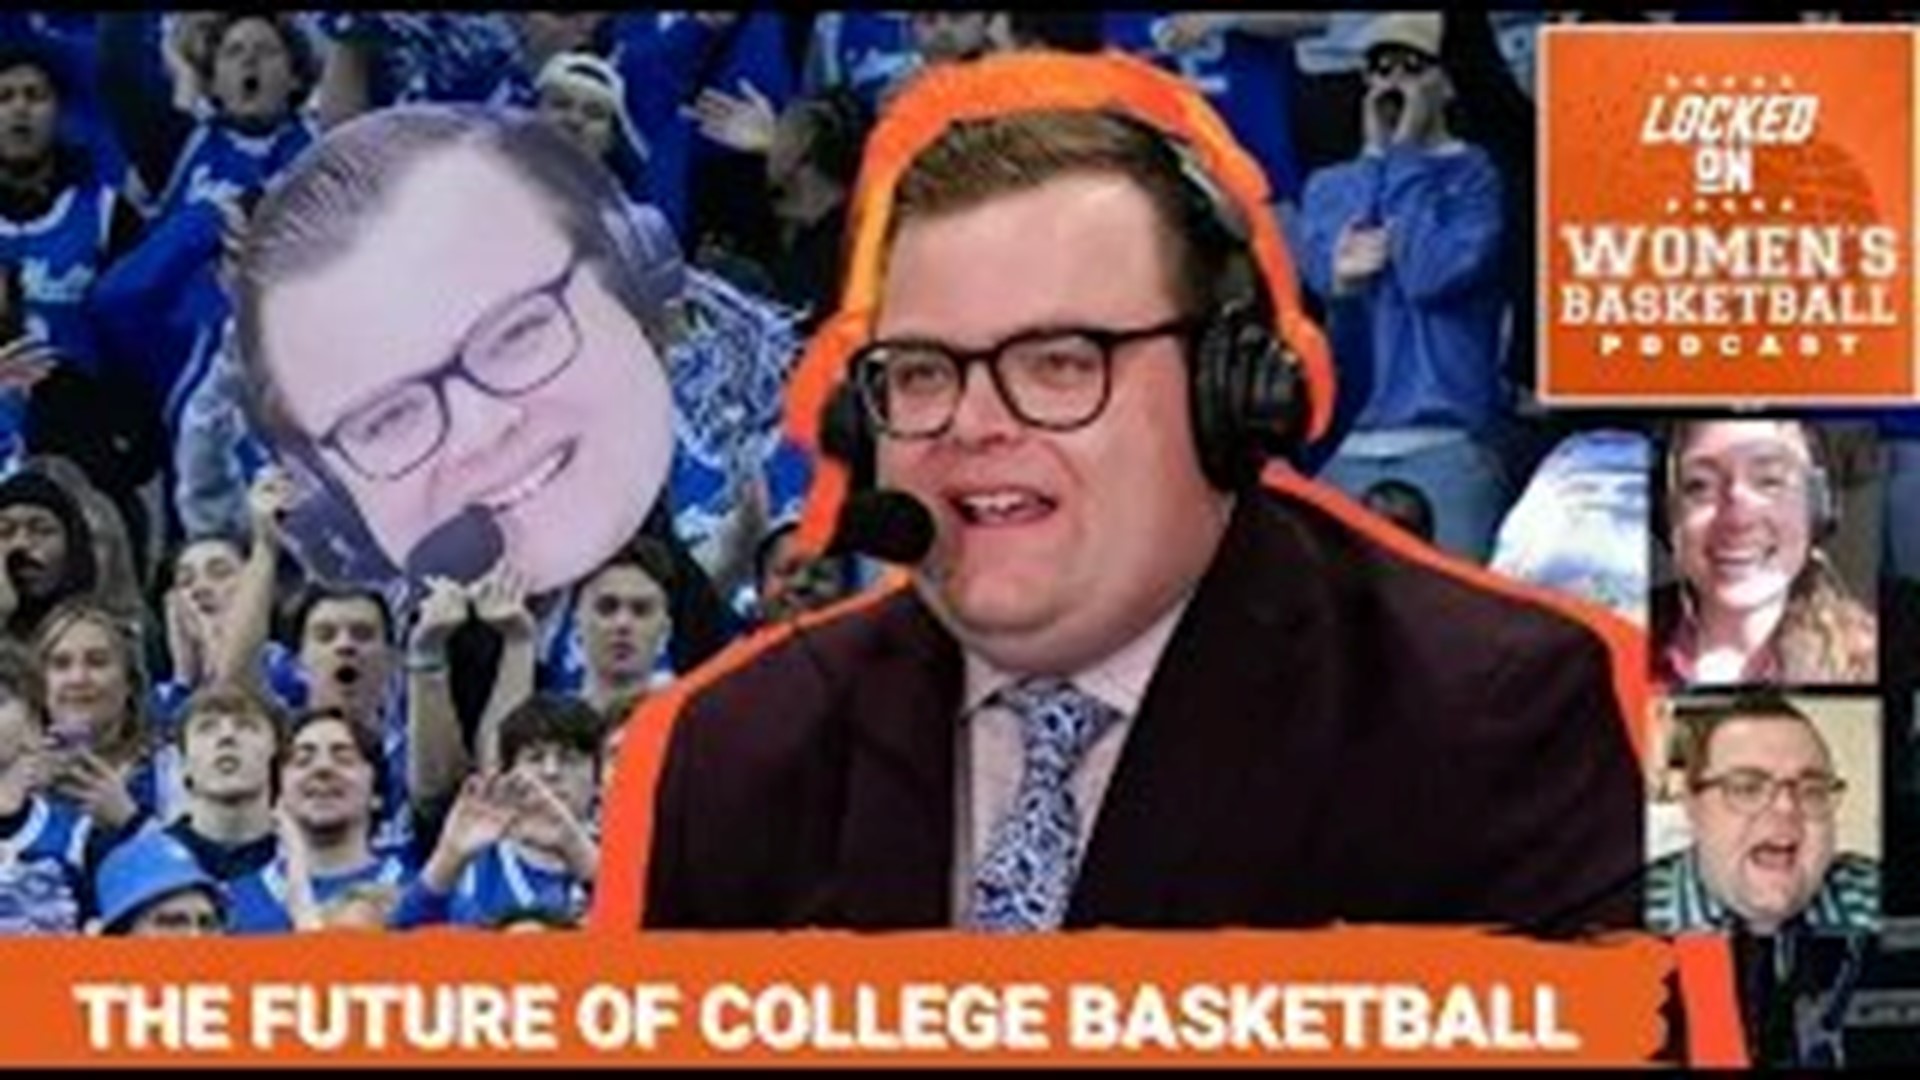 John Fanta covers BIG EAST basketball, is the voice of college hoops of Fox Sports, and gives one of the greatest hype speeches around.